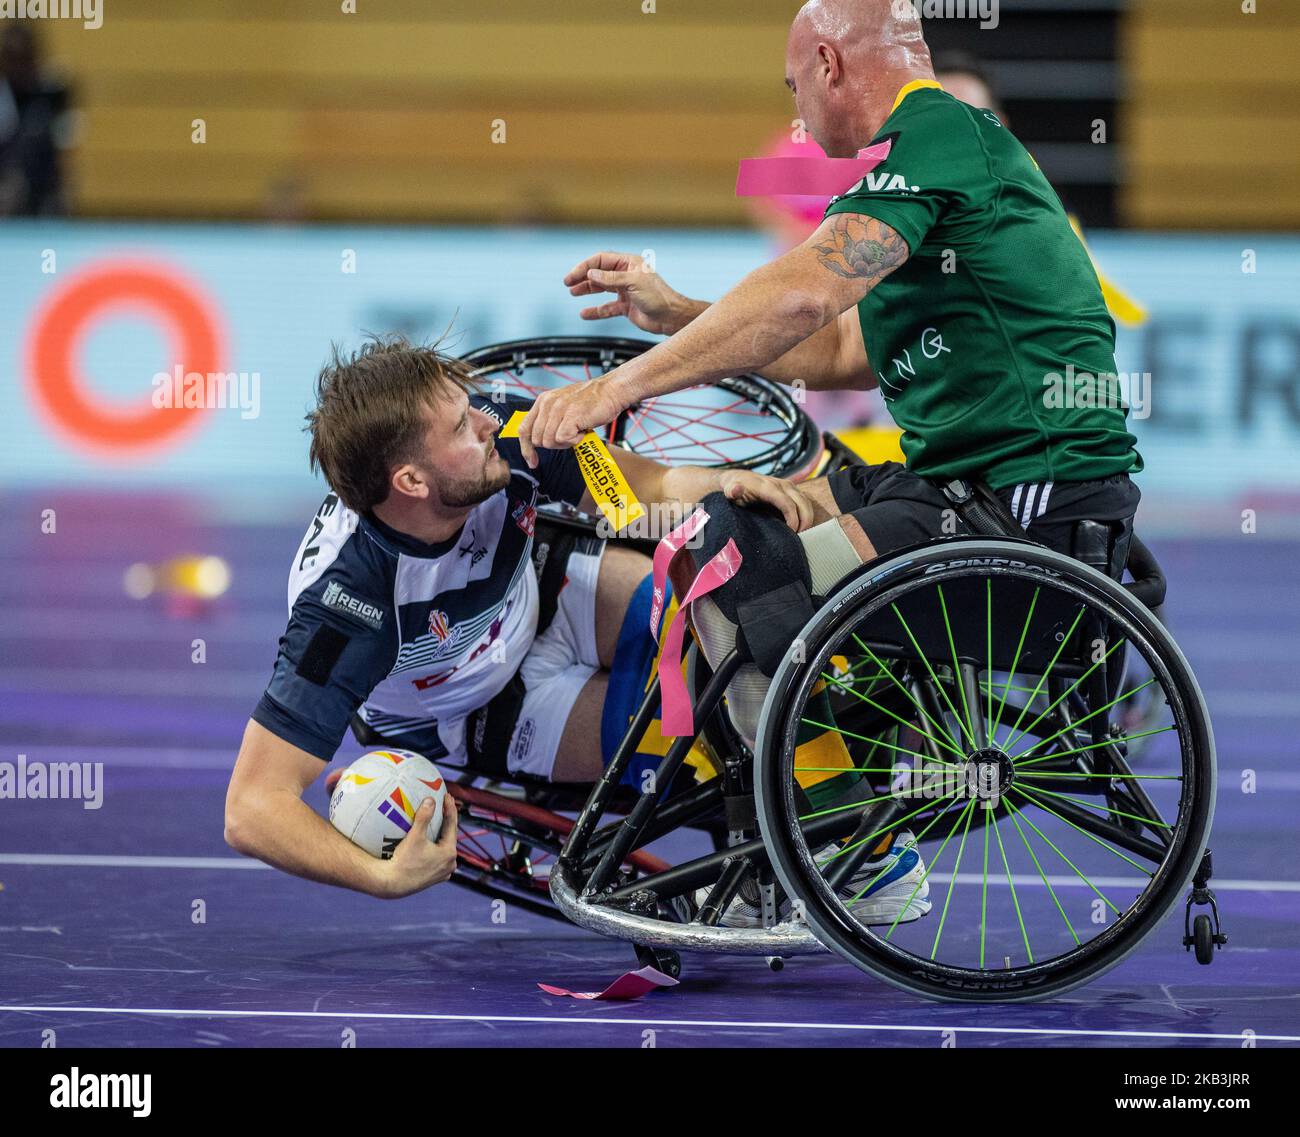 England's Sebastien Bechara is tackled by Australia's Peter Arbuckle during the Wheelchair Rugby League World Cup group A match at the Copper Box Arena, London. Picture date: Thursday November 3, 2022. Stock Photo